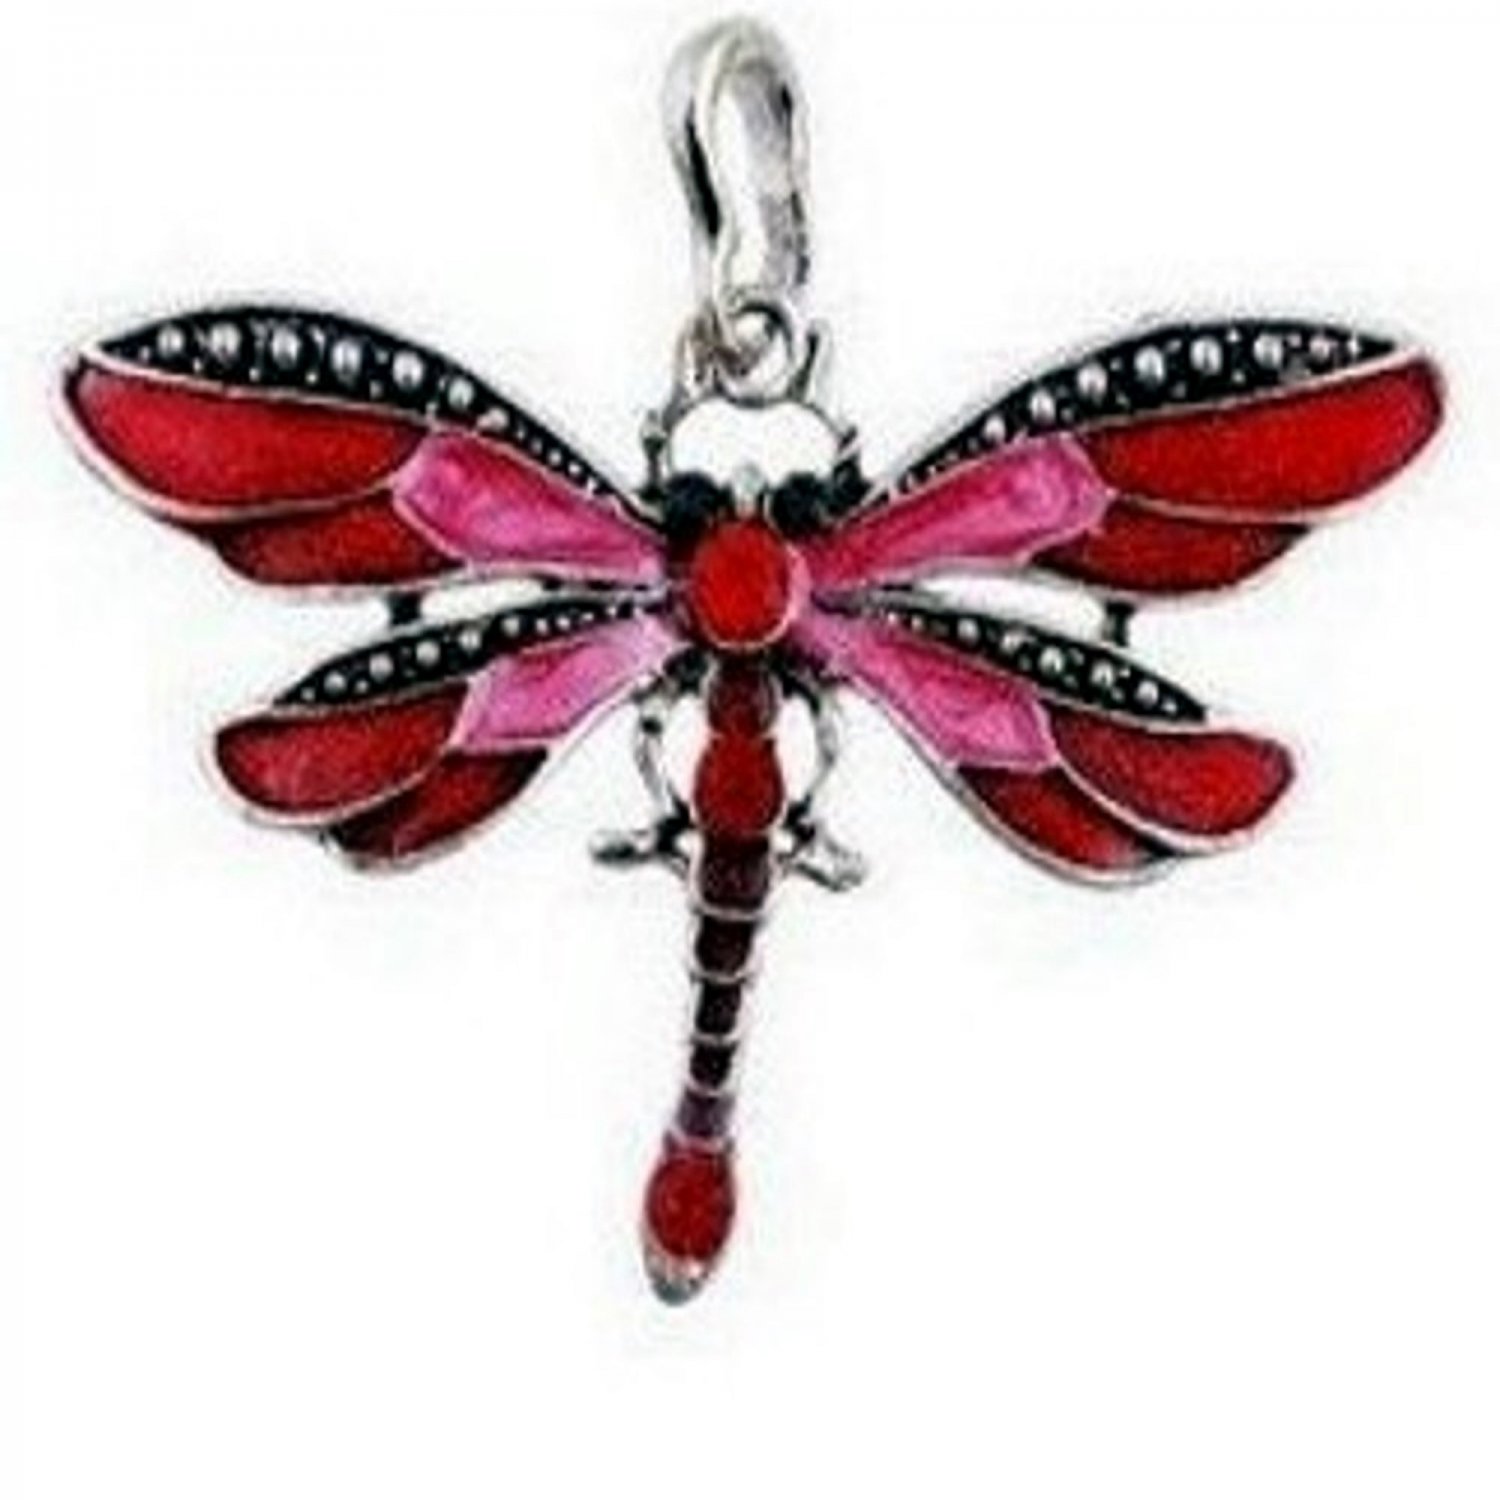 Jeweled Flying Dragonfly Pendant - Red and Pink FREE SHIPPING